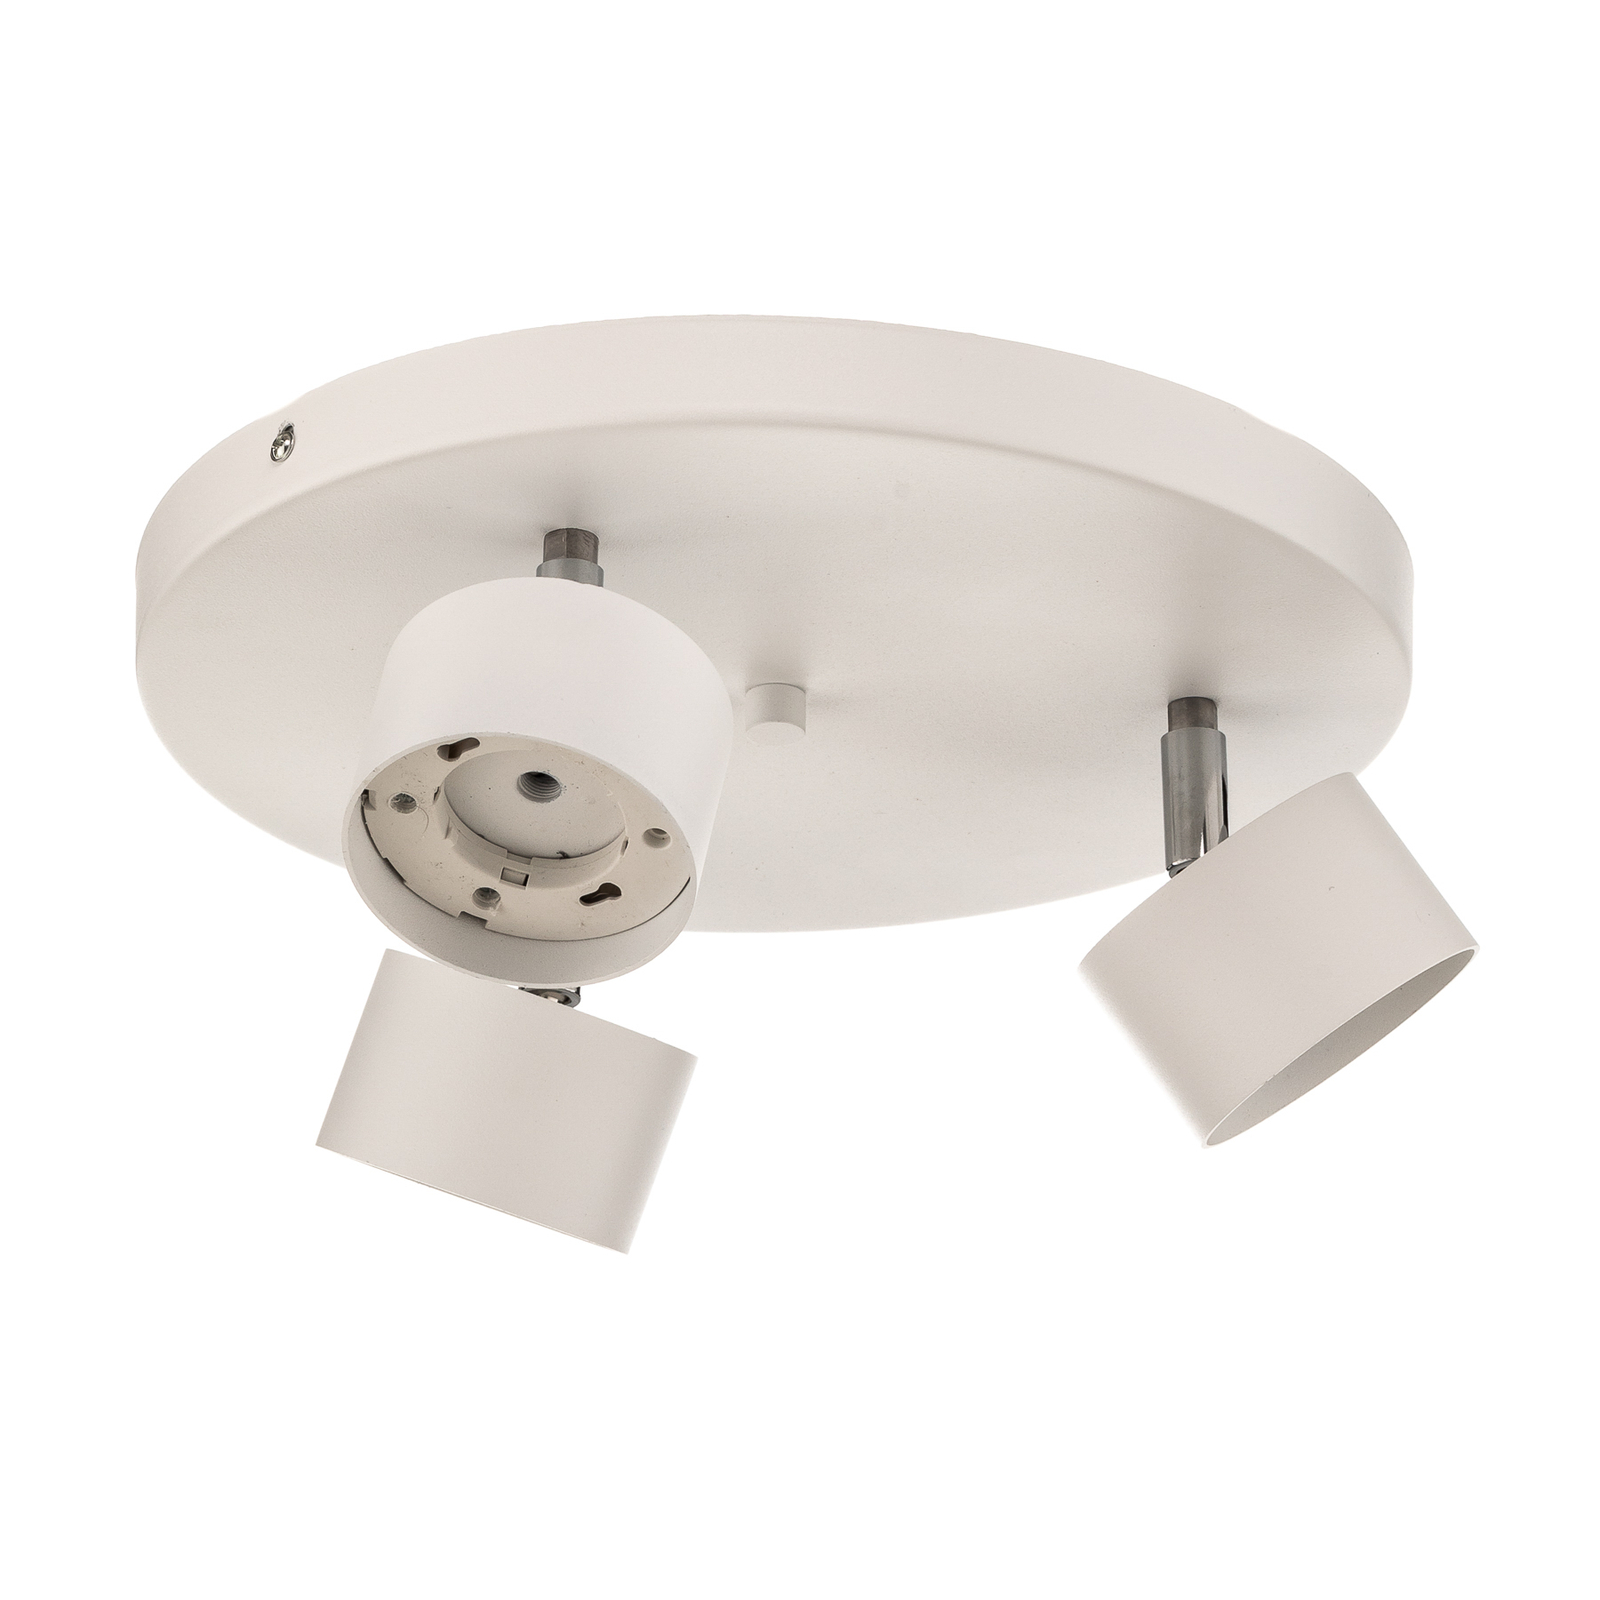 Ceiling spotlight Cloudy 3-bulb round white